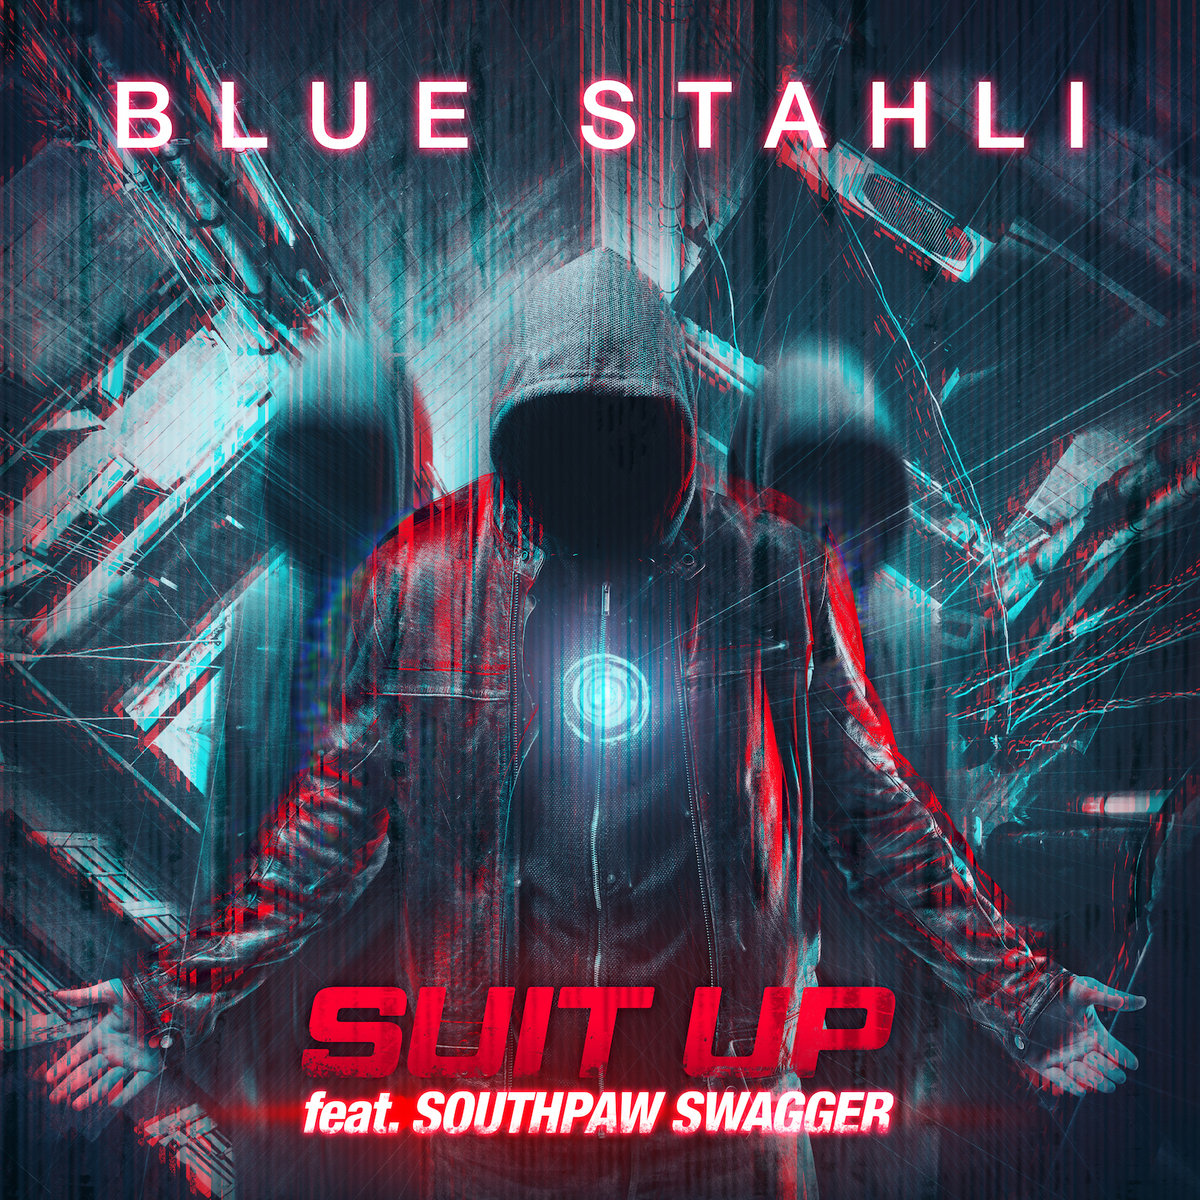 Blue Stahli (feat. Southpaw Swagger)